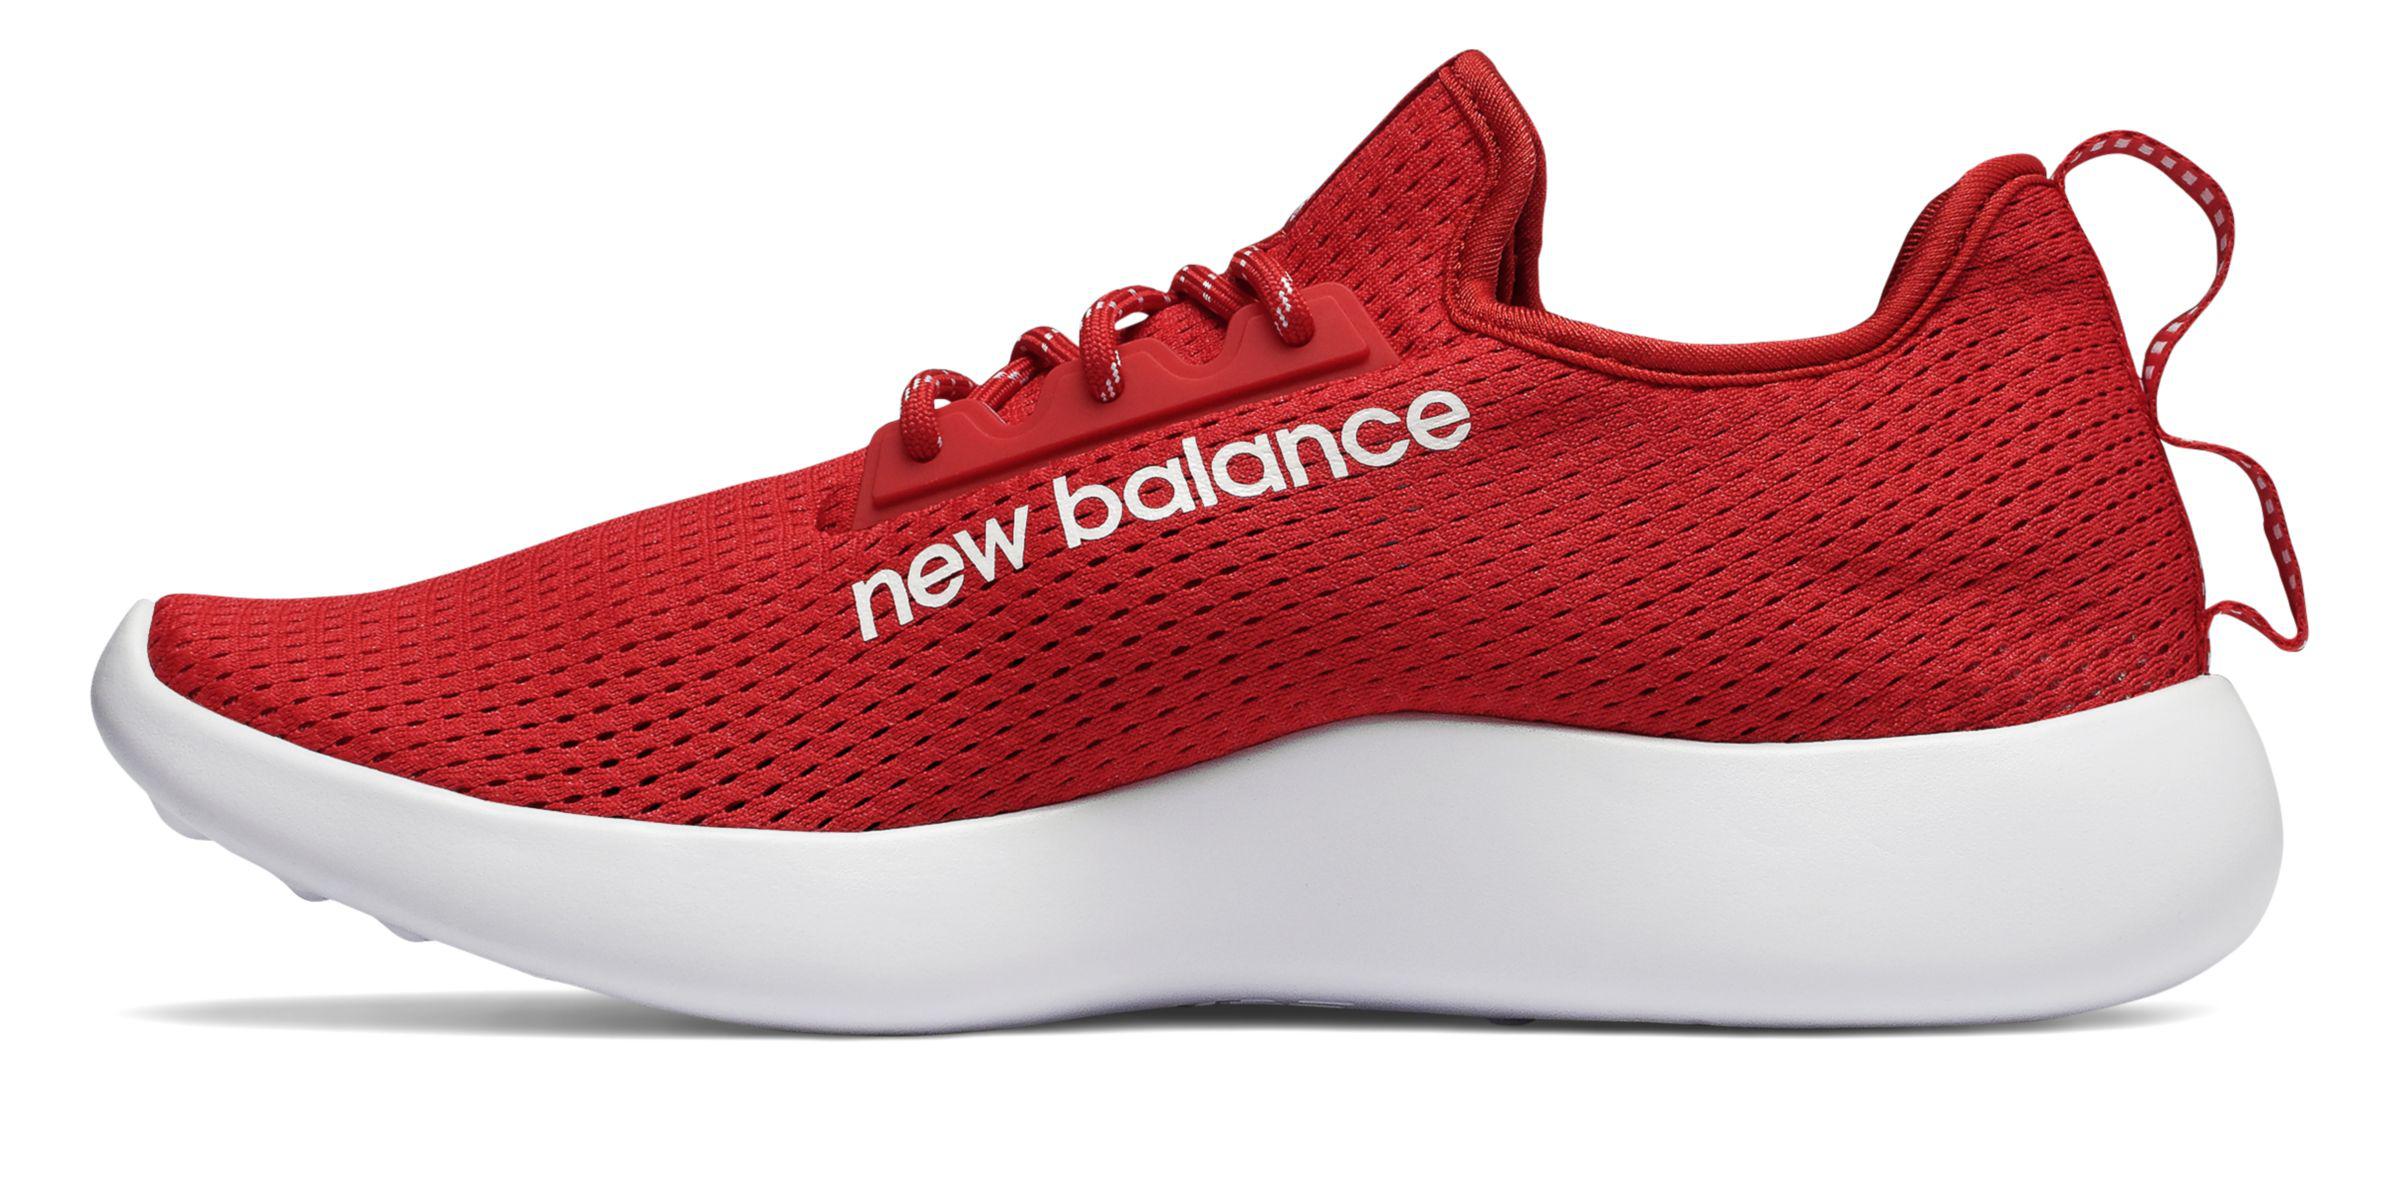 New Balance Nb Rcvry in Red for Men - Lyst